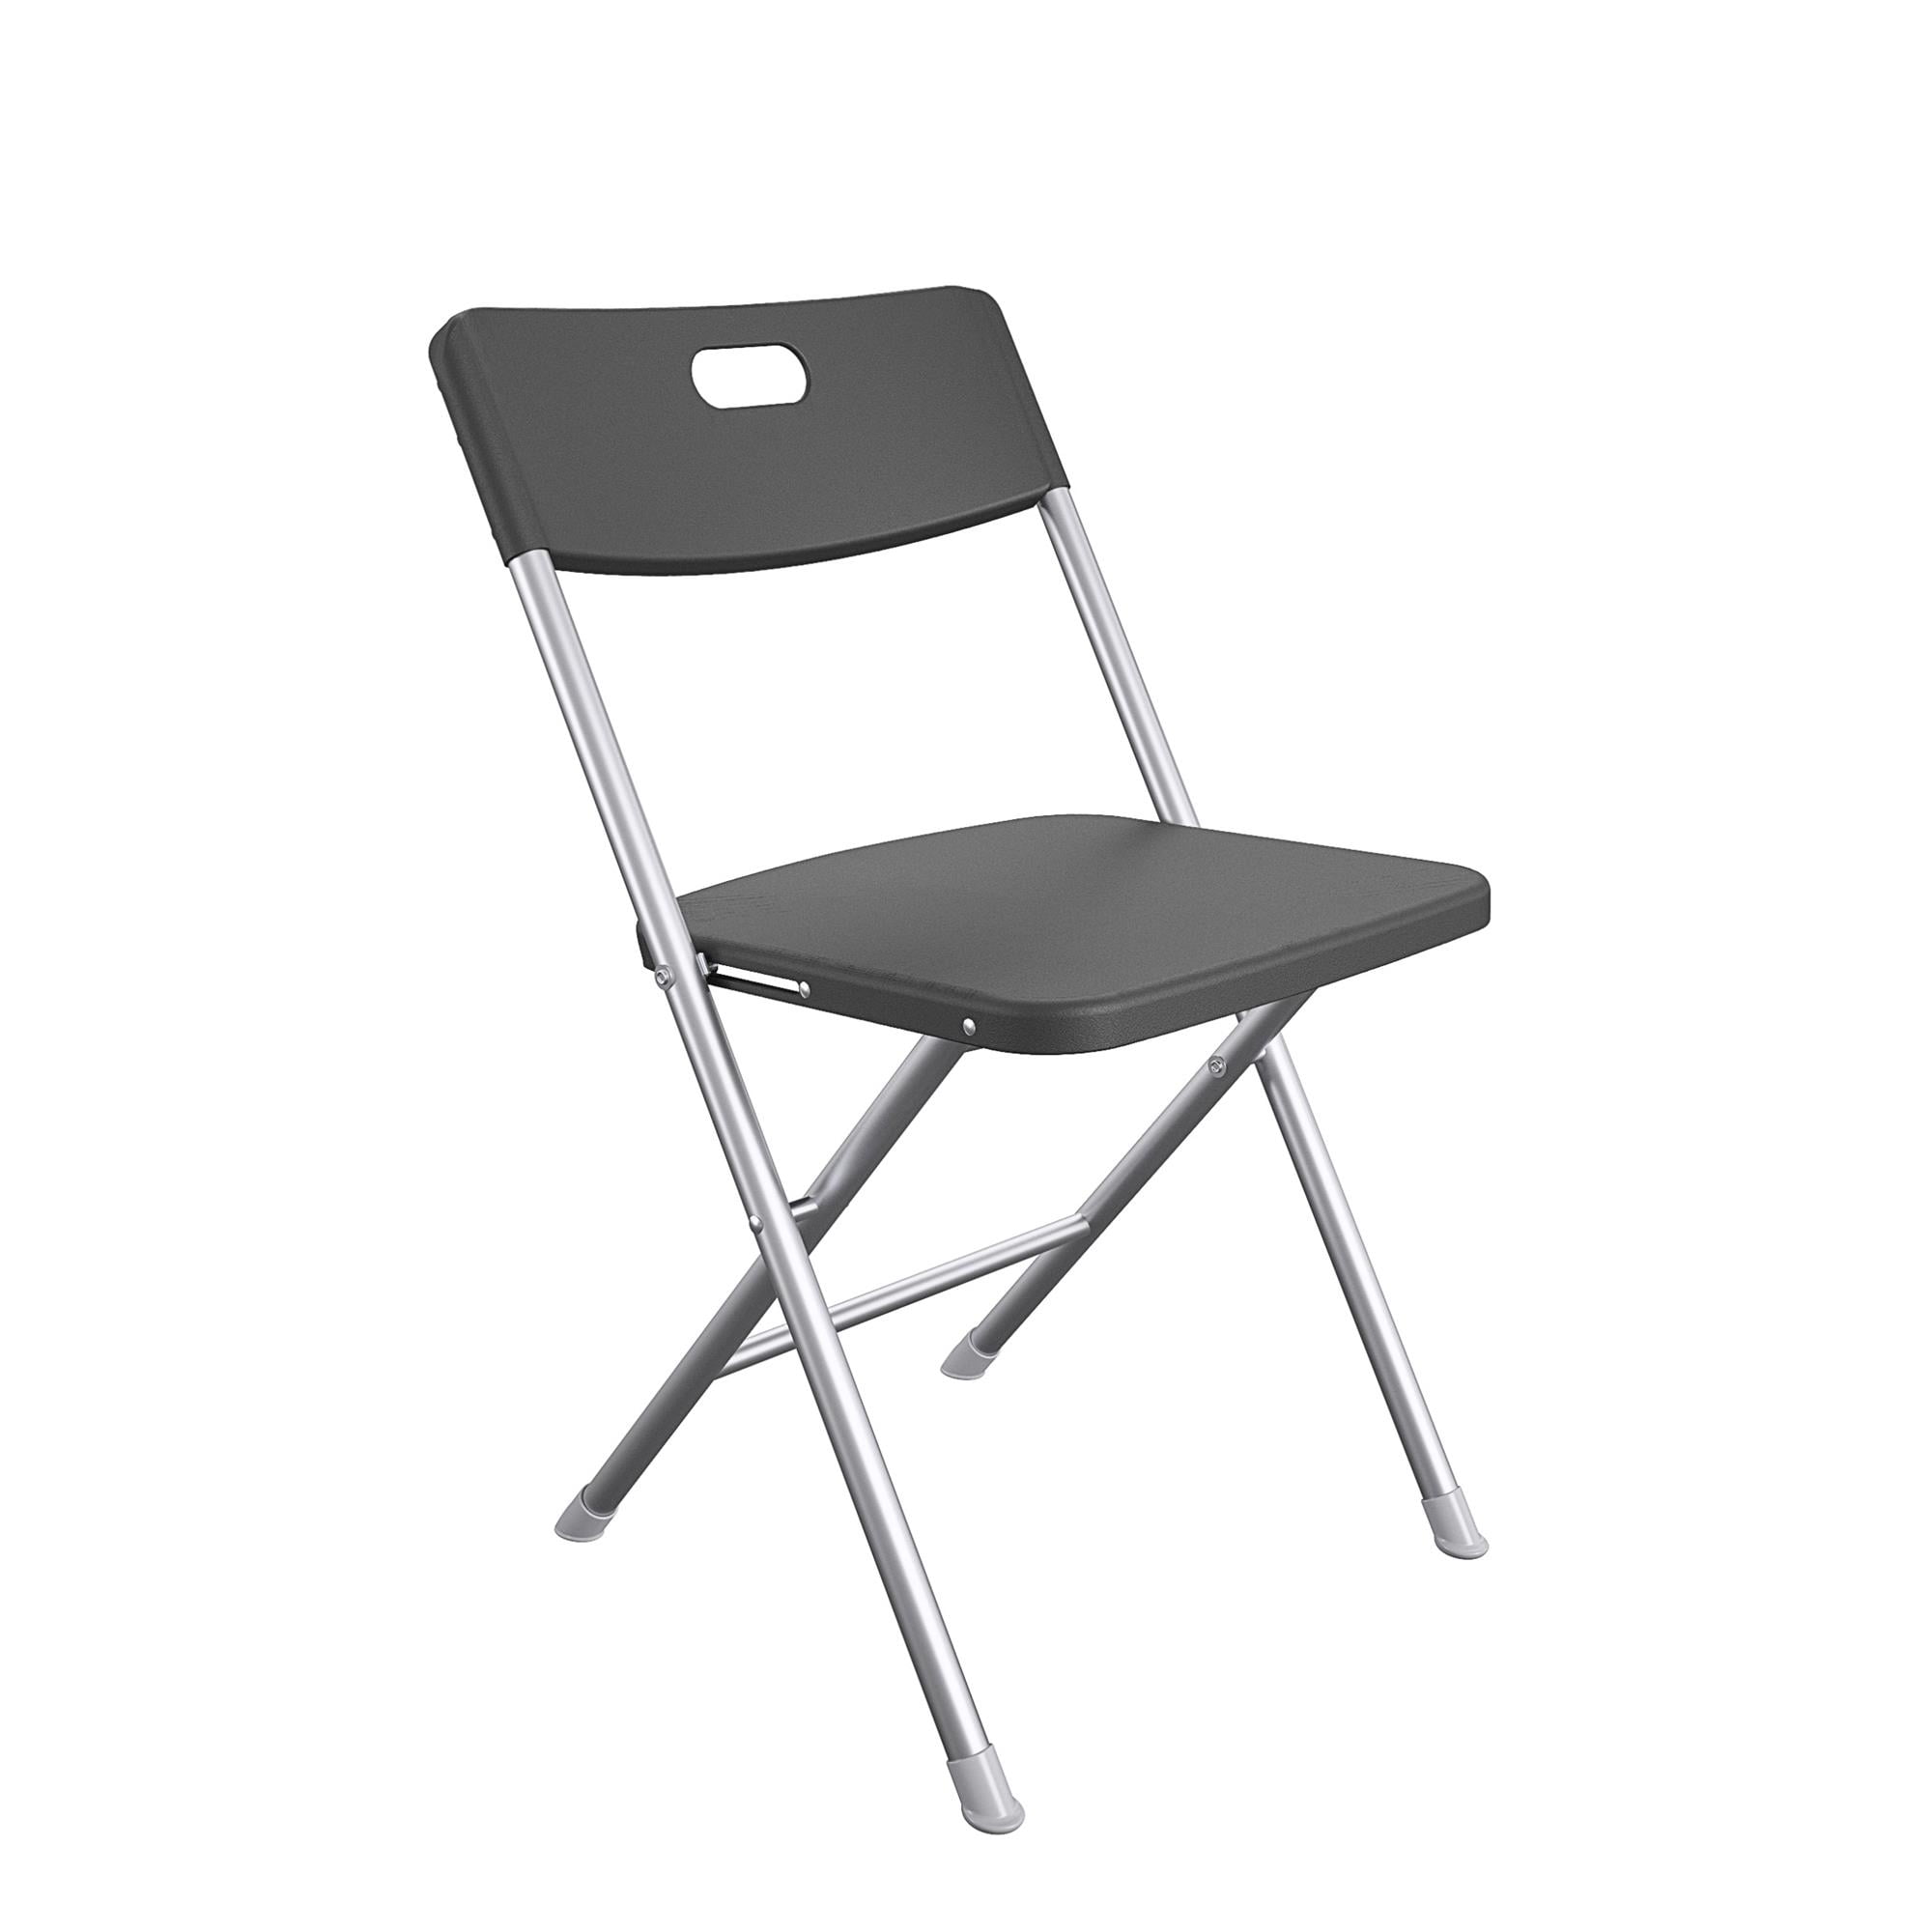 Folding Chair Camping Metal Dining Chair Cushion Study Event Office Desk Garden 